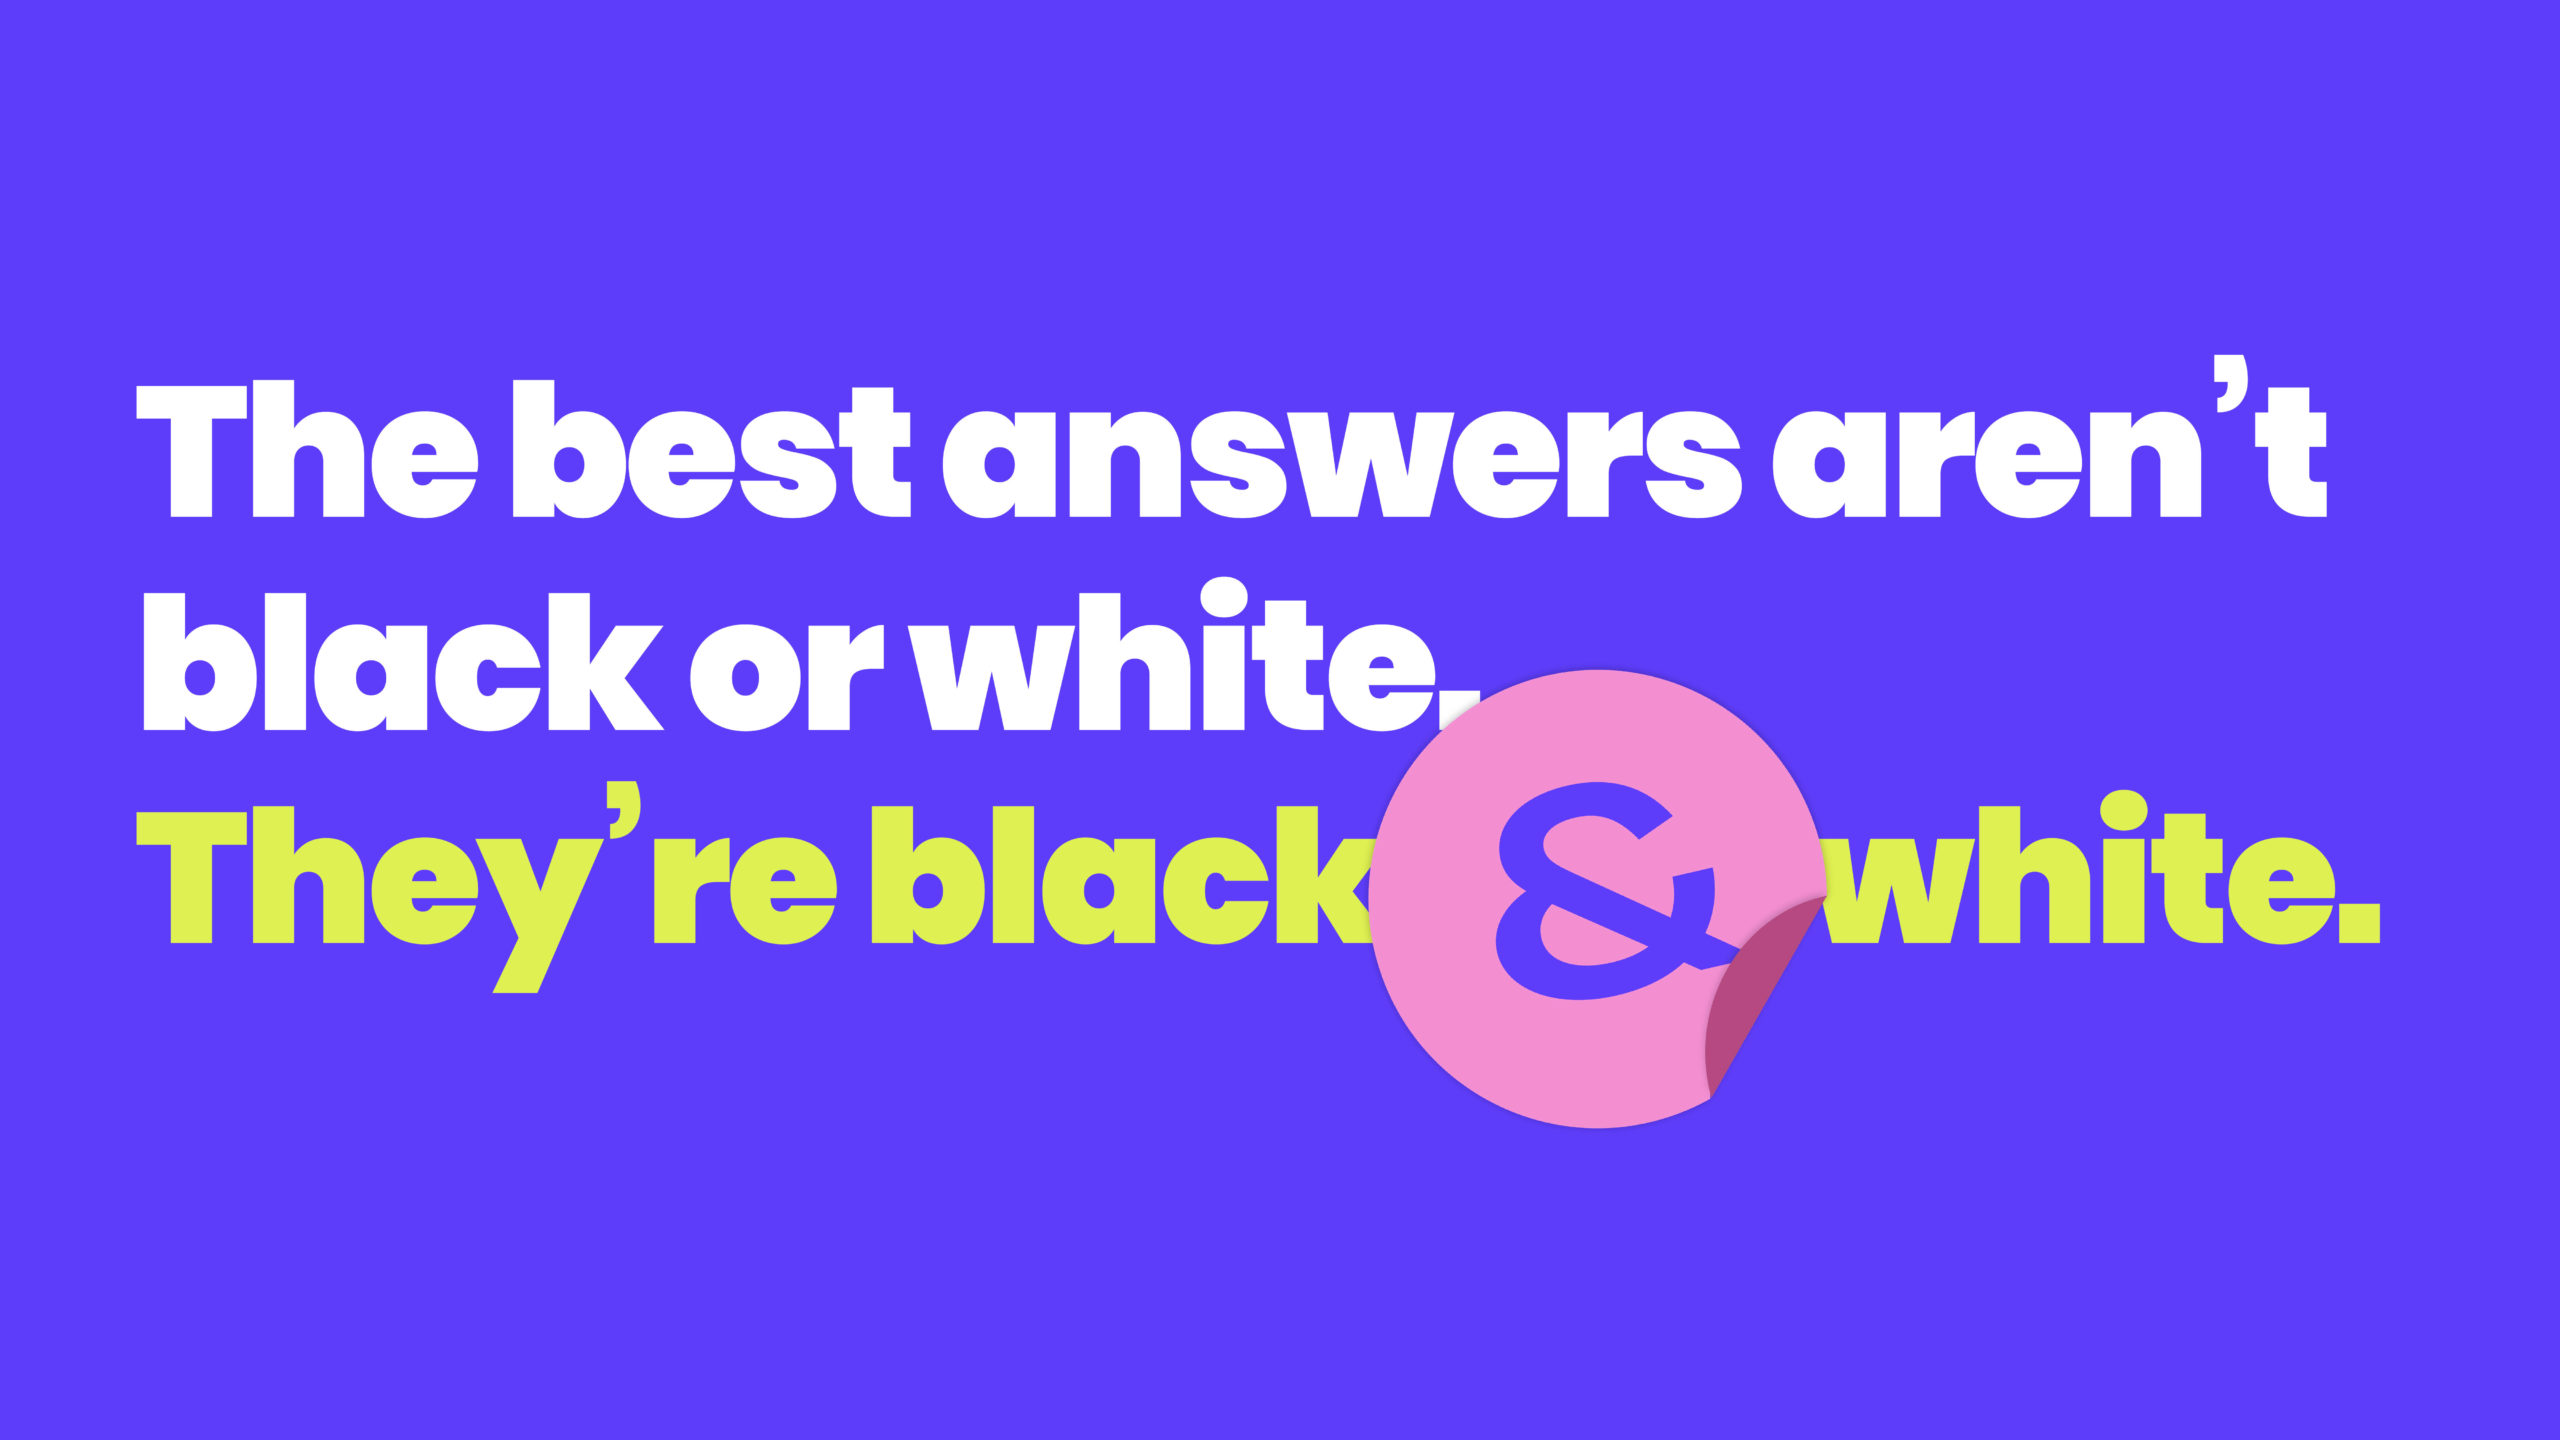 Bright purple background with the copy, "The best answers aren't black or white. They're black & white."